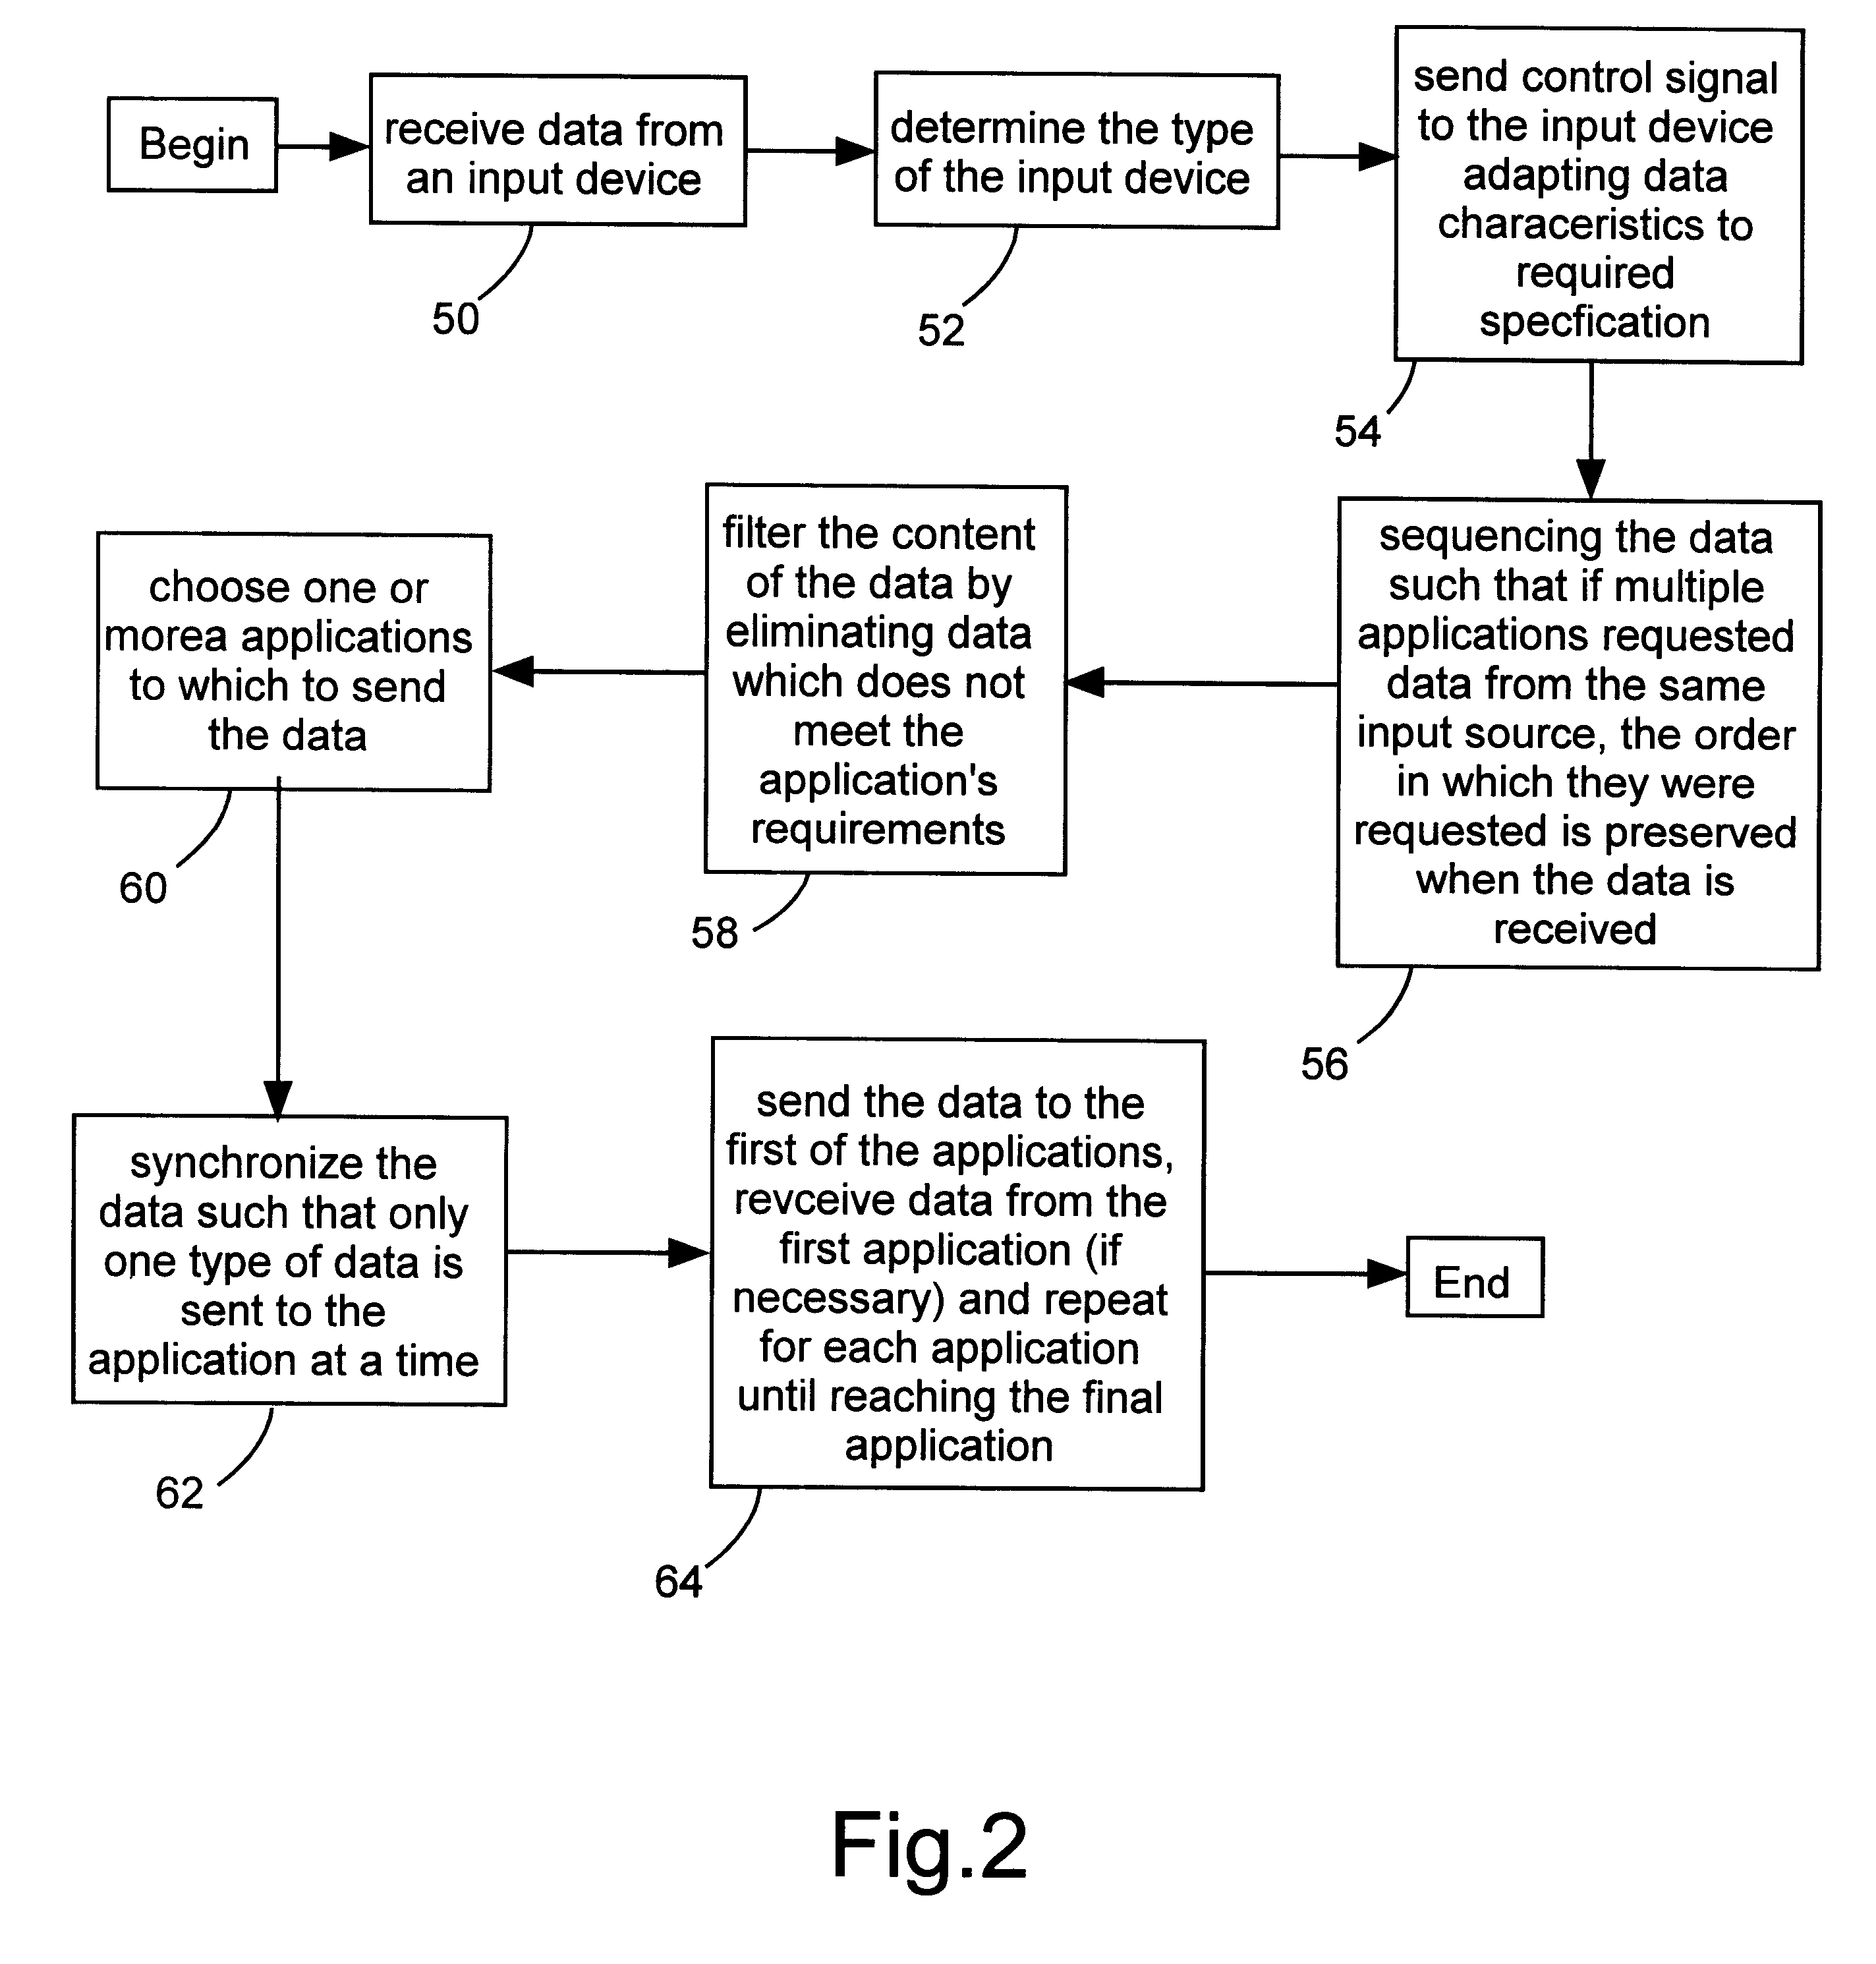 Configurable operating system having multiple data conversion applications for I/O connectivity